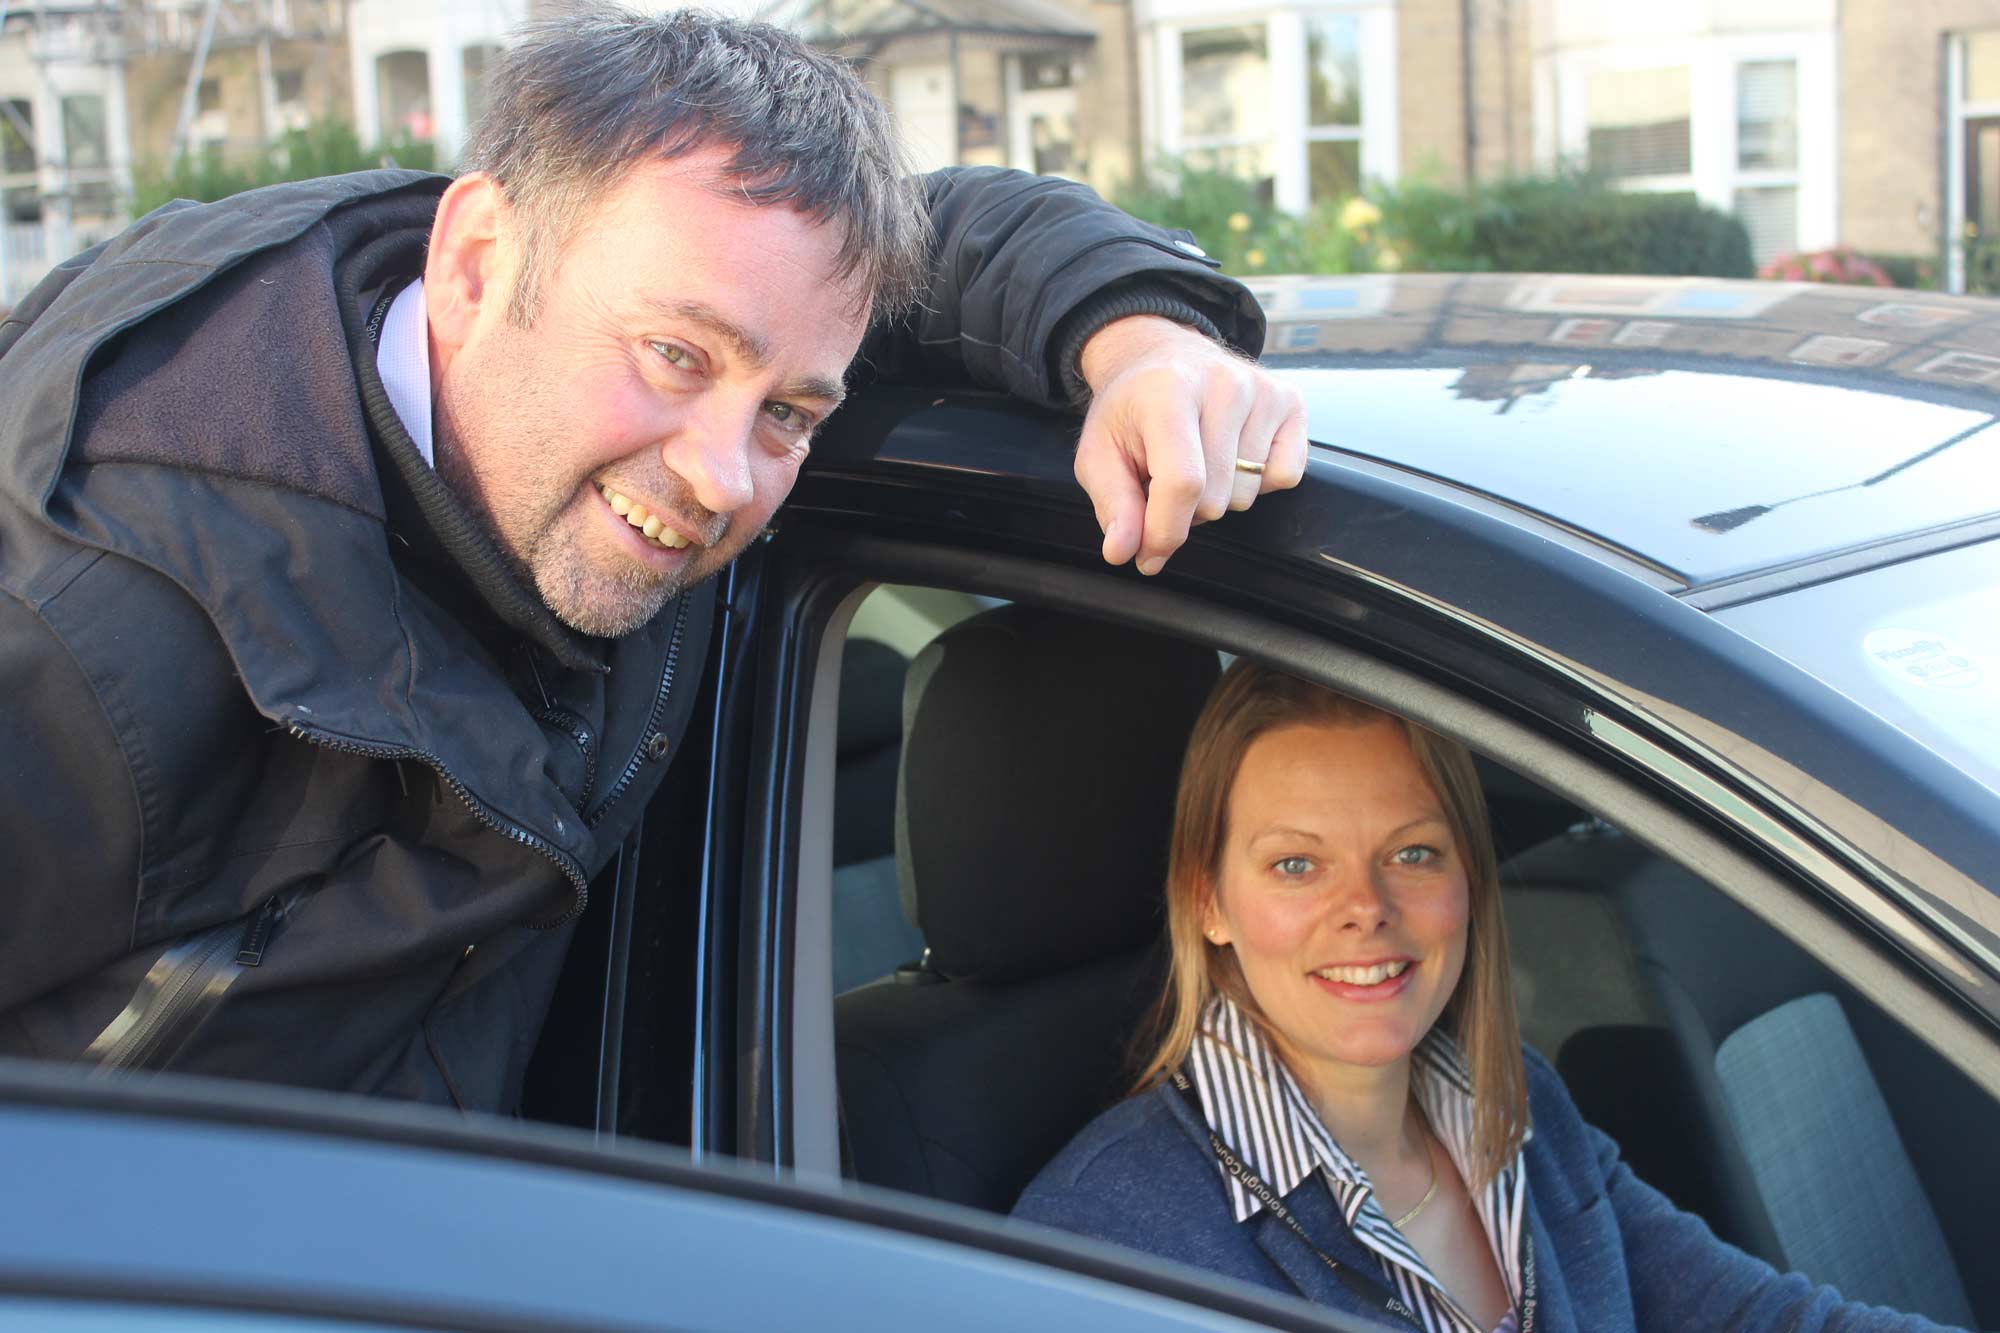 Two’s company: Lift sharers Mark Lee and Sarah Whittaker, who have been using harrogatecarshare.com since 2013